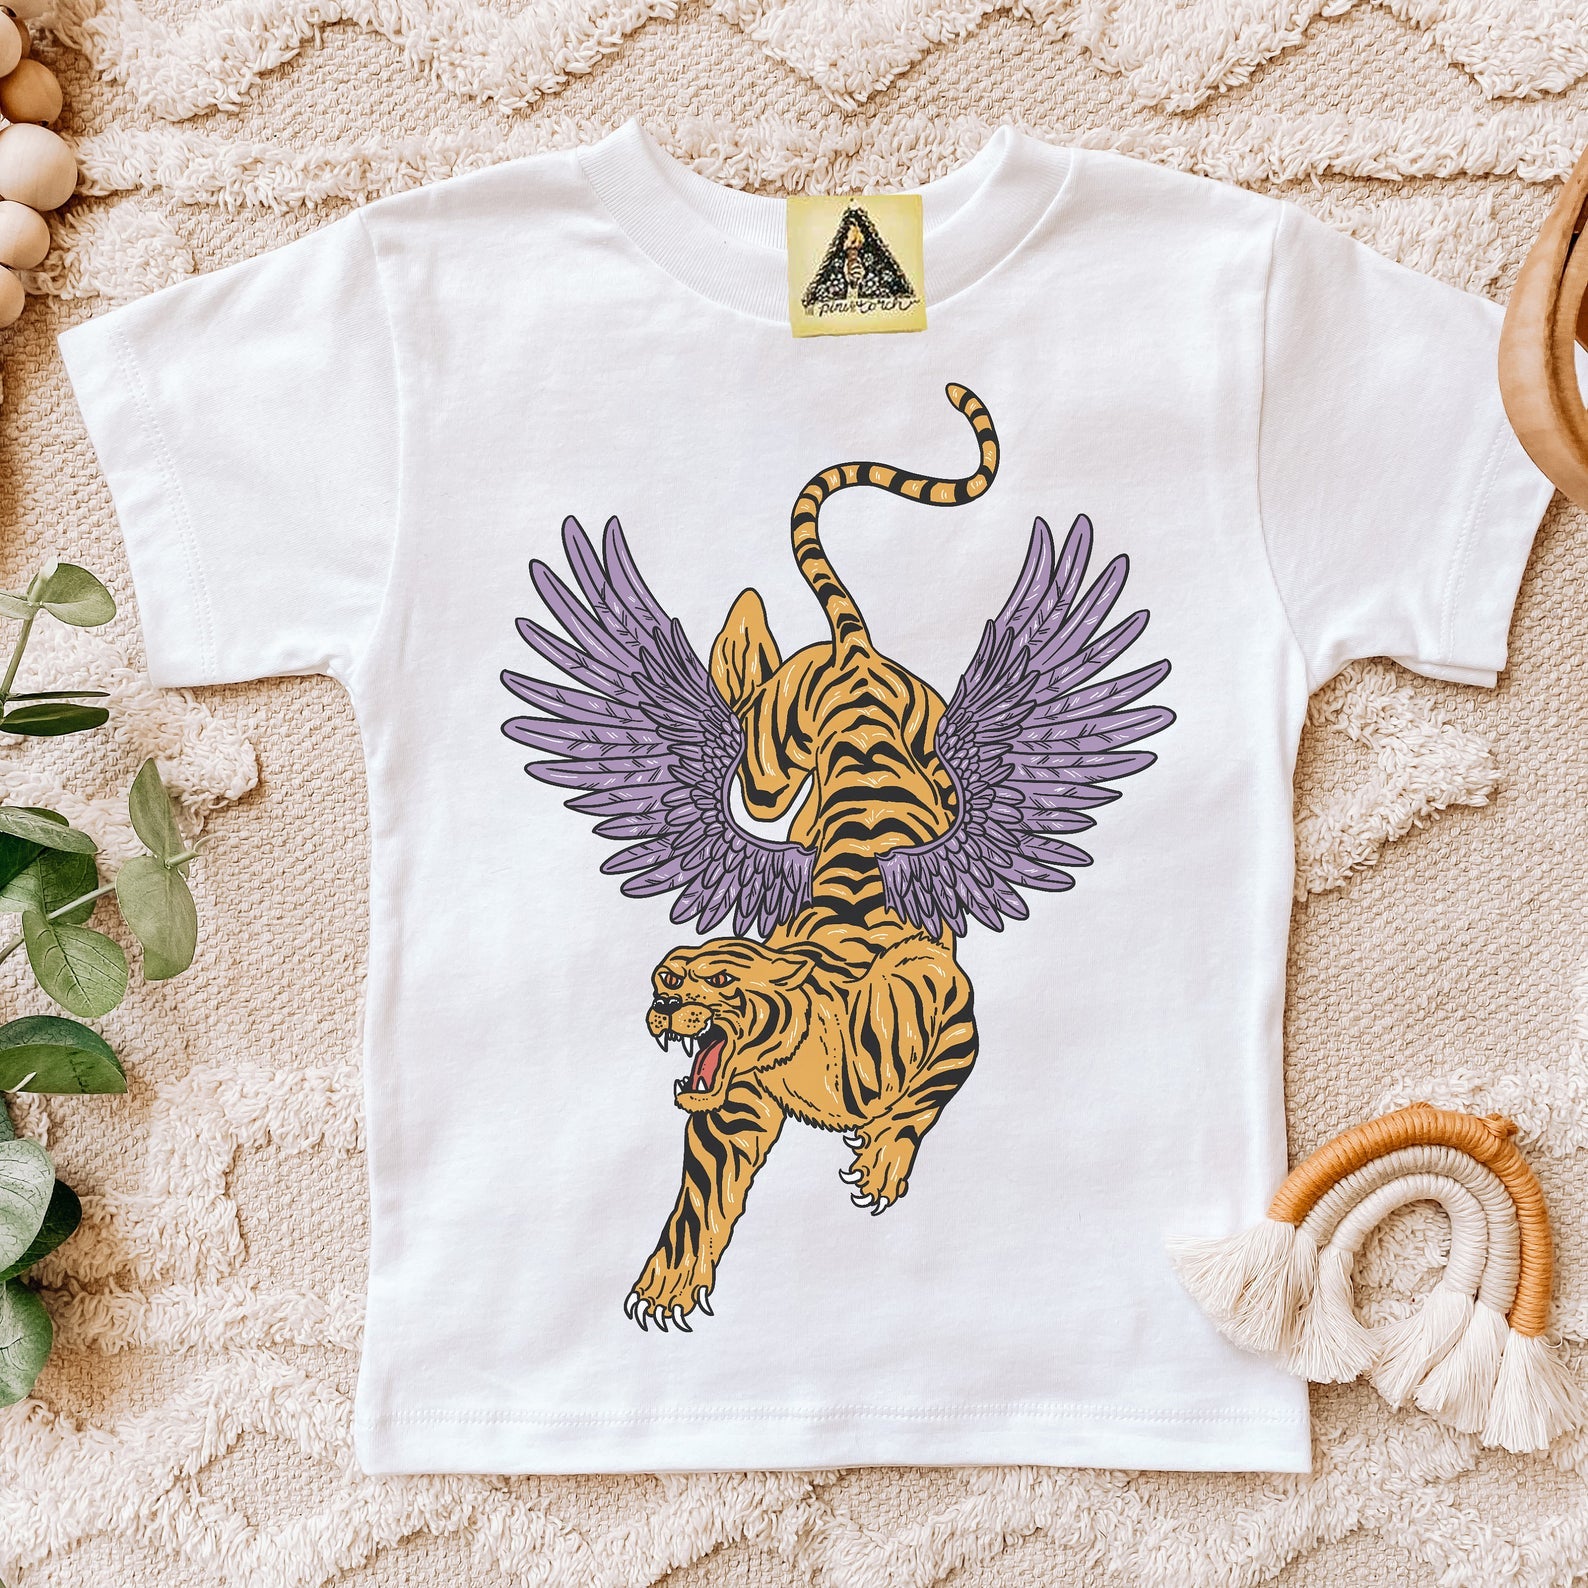 « TIGER WITH WINGS » KID'S TEE